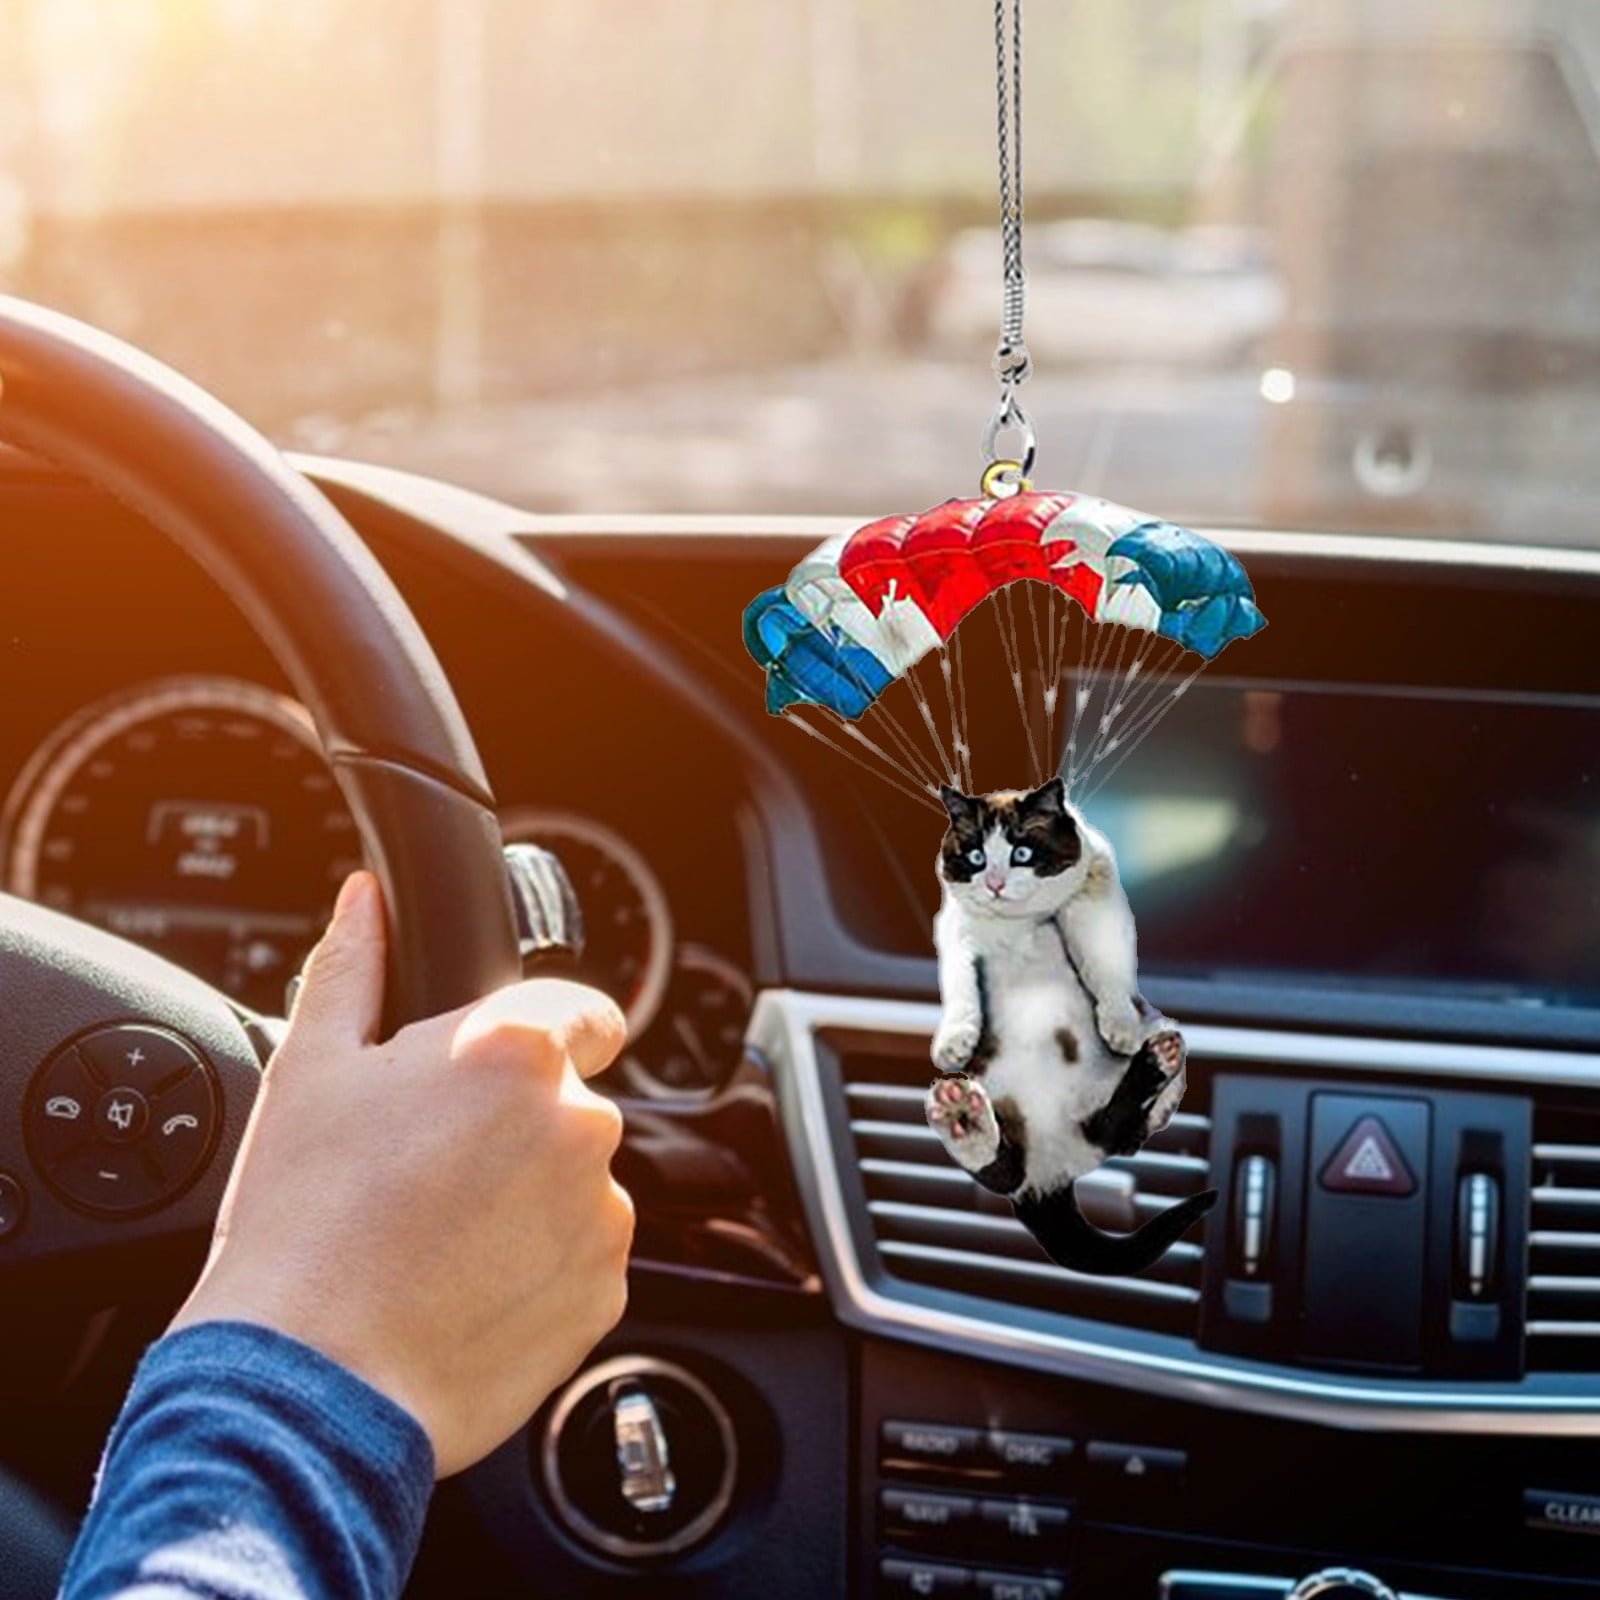 Rear View Mirror Hanging Accessories Of Funny Balloon Cat, Car